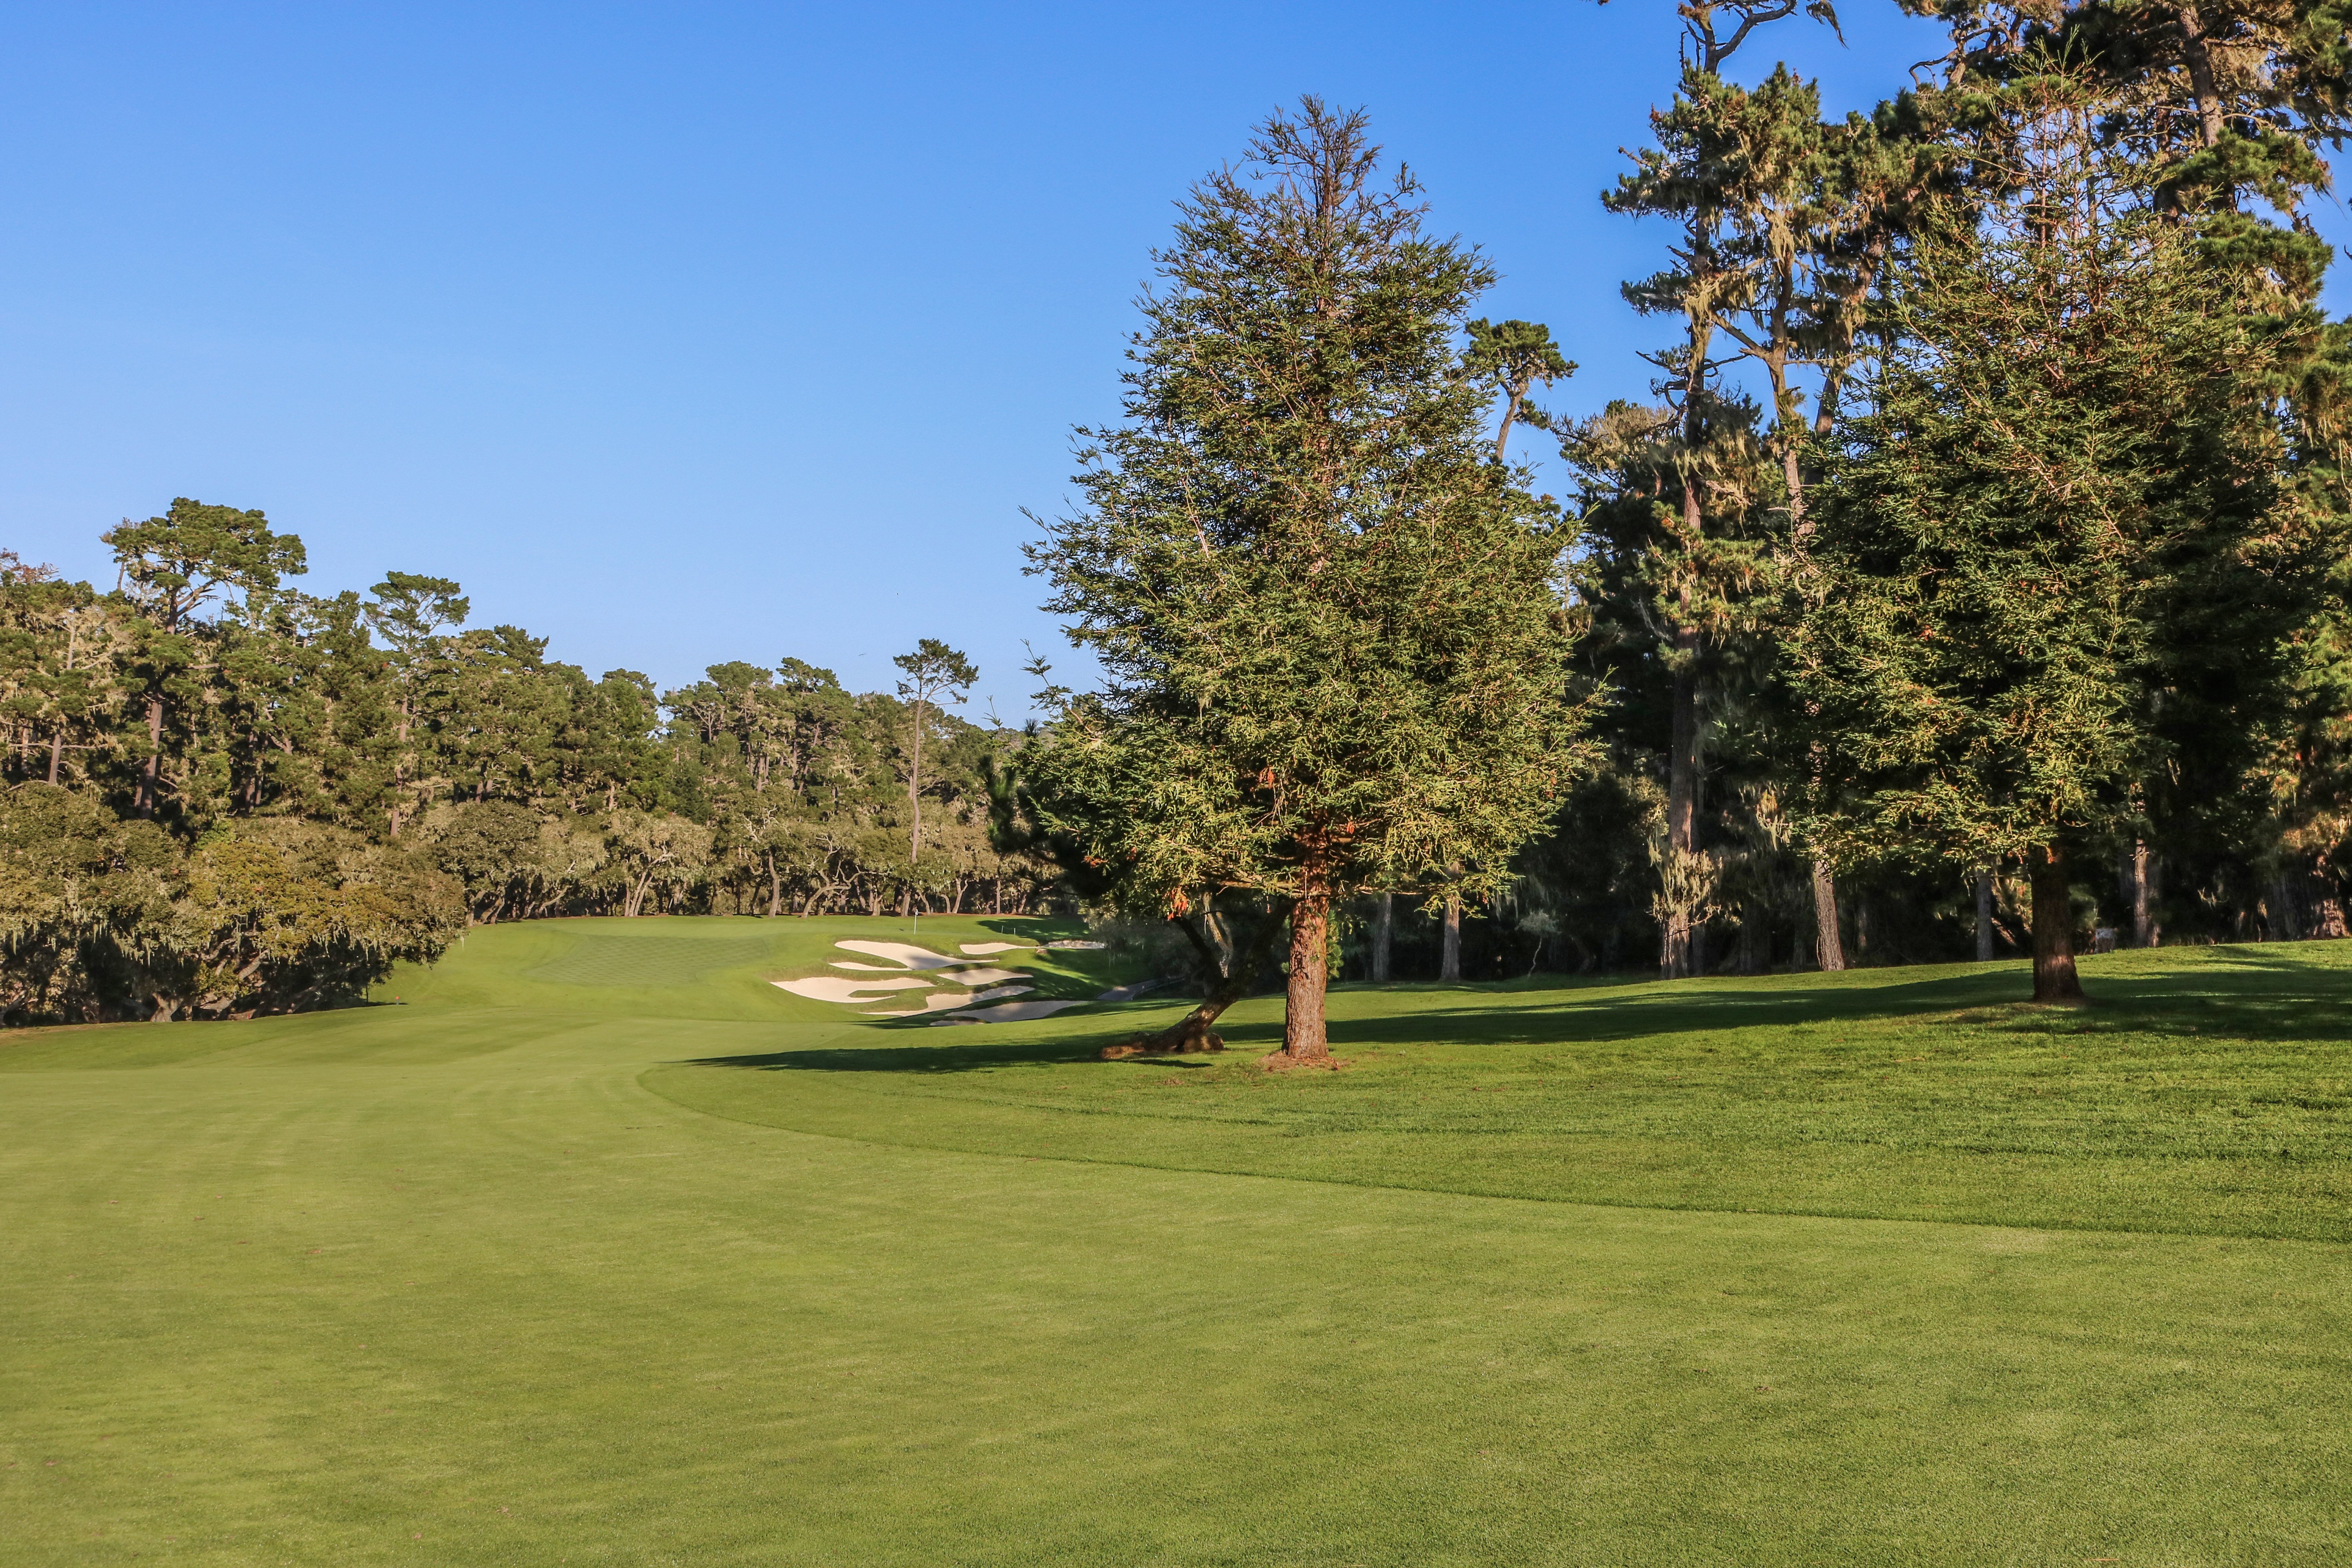 11th hole at Spyglass Hill